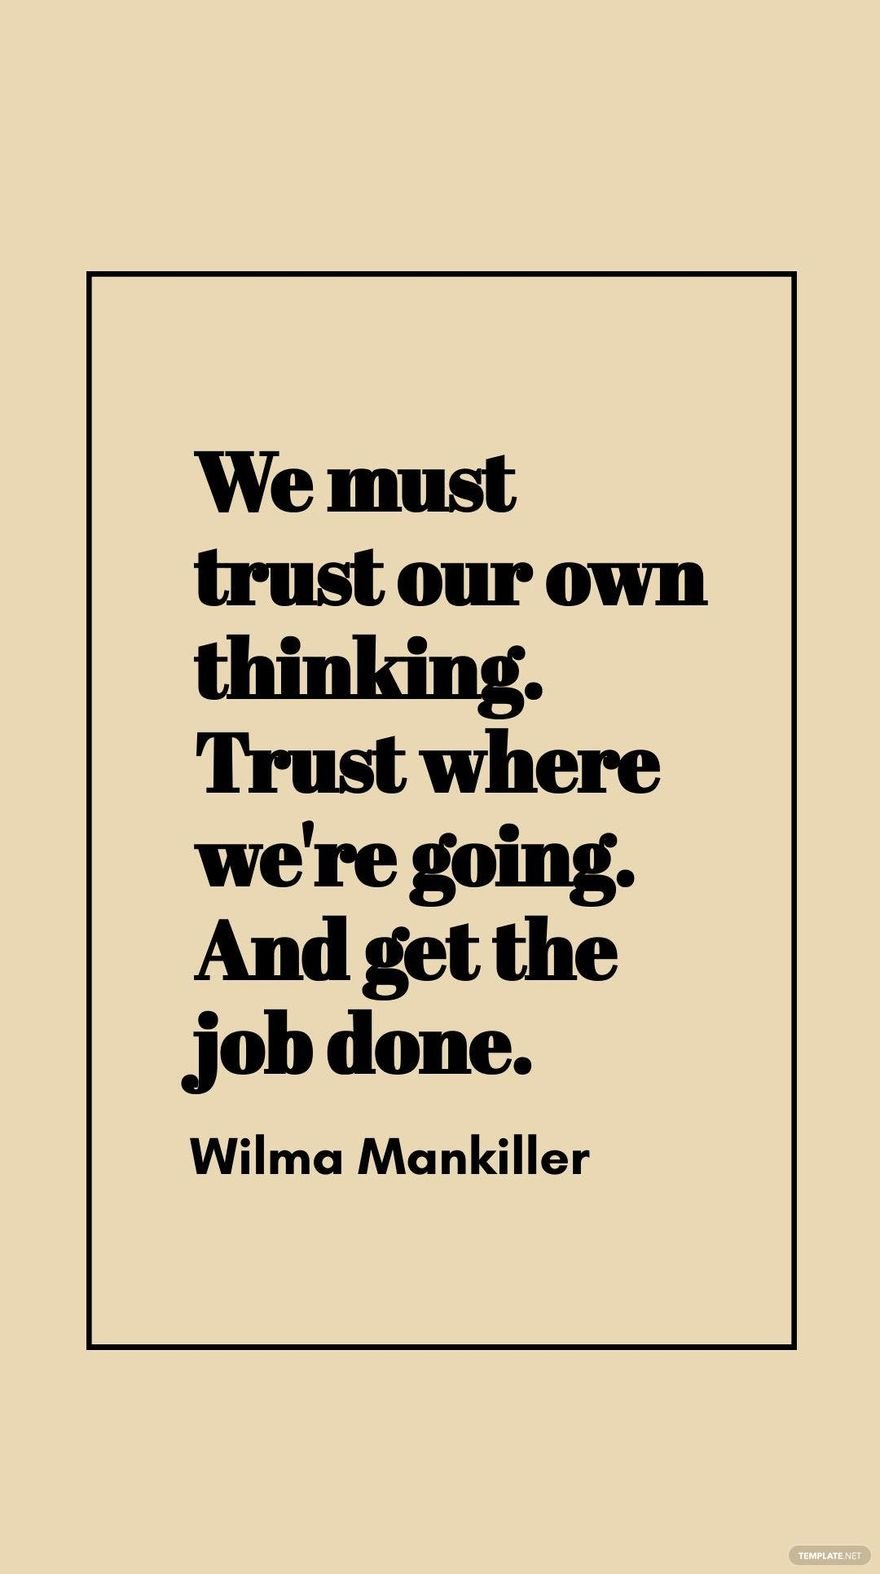 Free Wilma Mankiller - We must trust our own thinking. Trust where we're going. And get the job done.